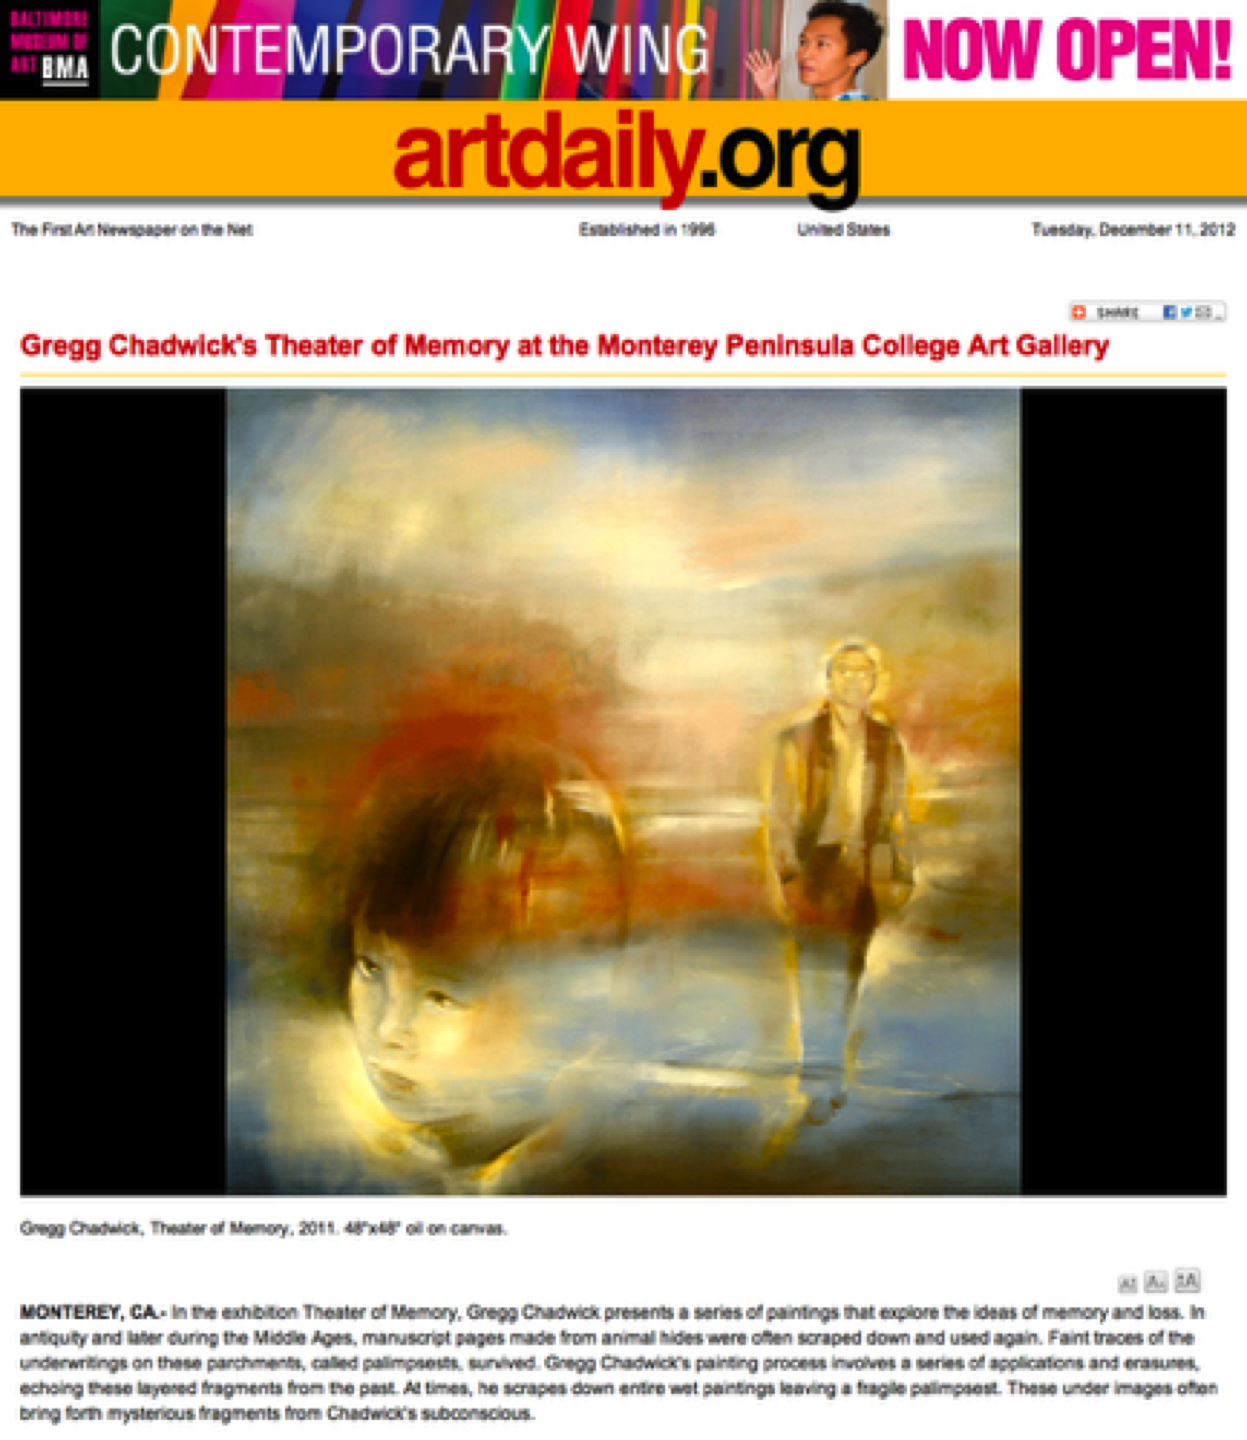 Gregg Chadwick's Exhibition Theater of Memory at the Monterey Peninsula Art Gallery 
Featured on ArtDaily.org - October 2011